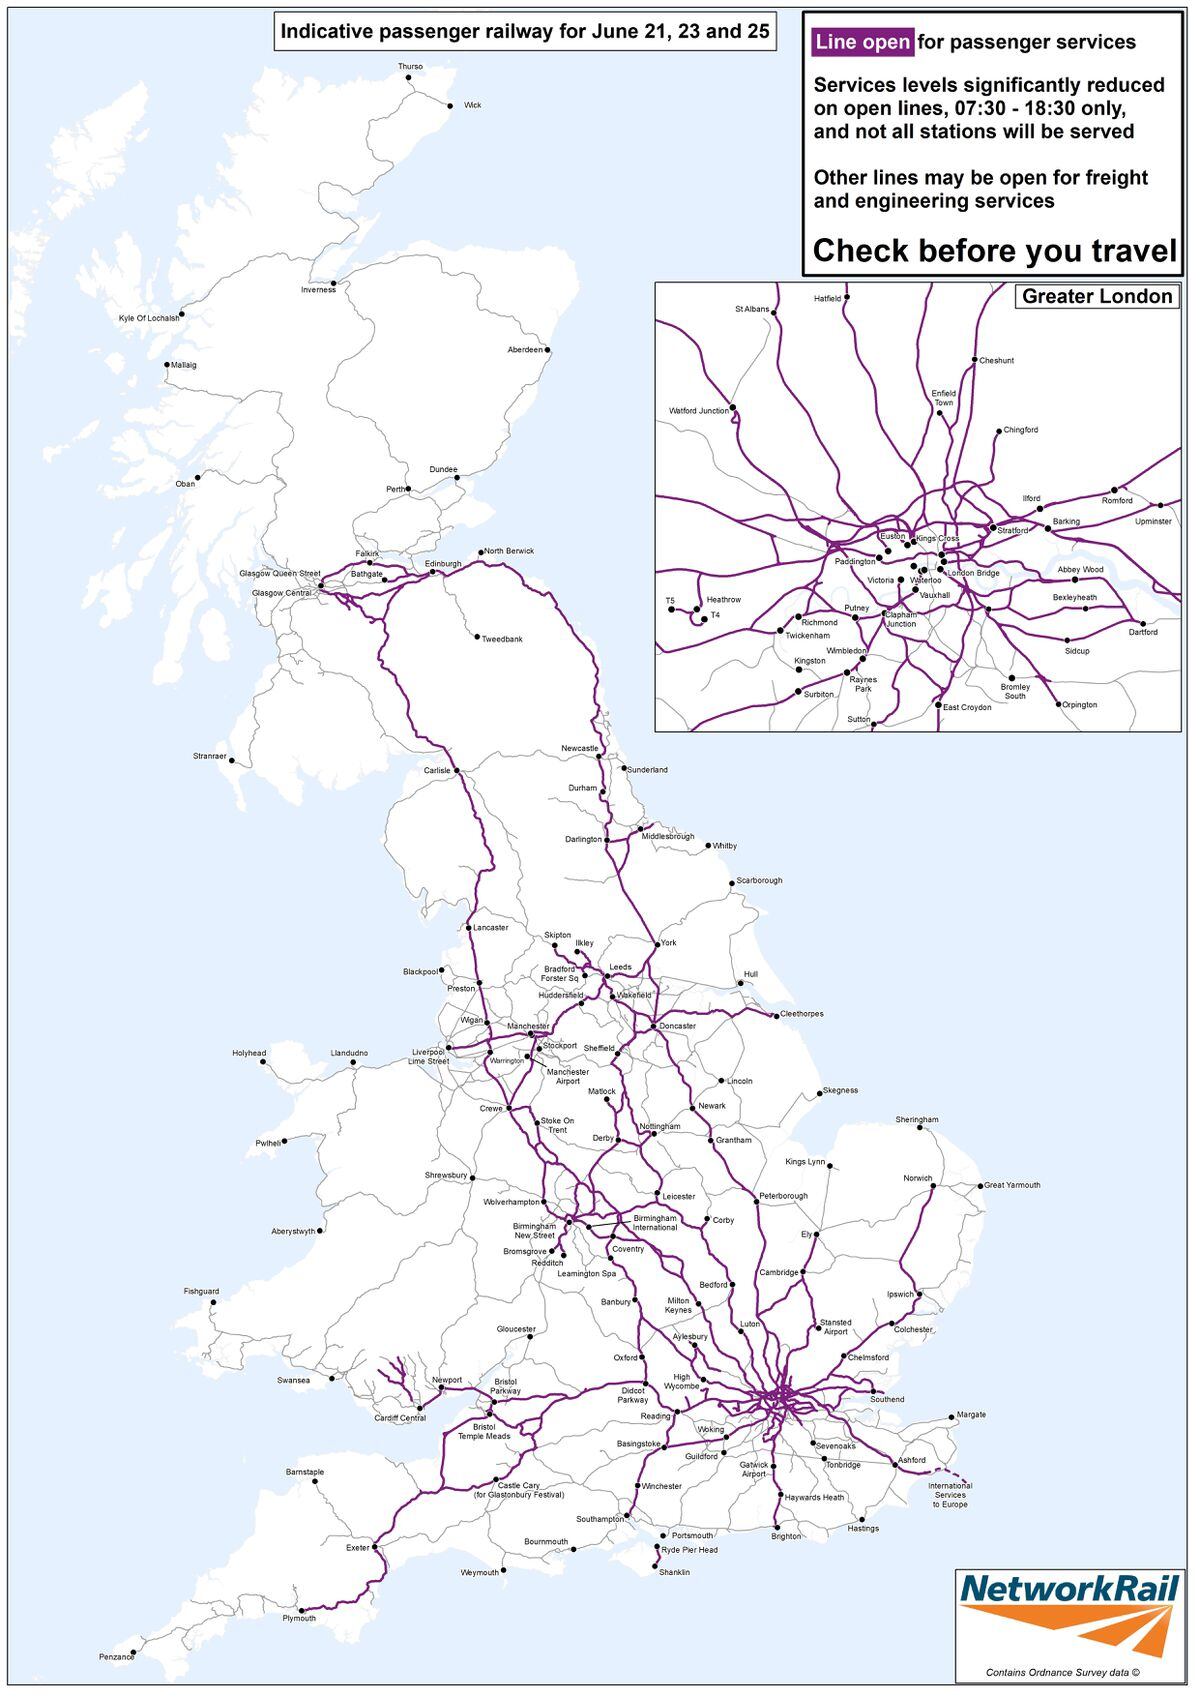 Network Rail has published a map showing, in purple, the lines that will be open during the strike action